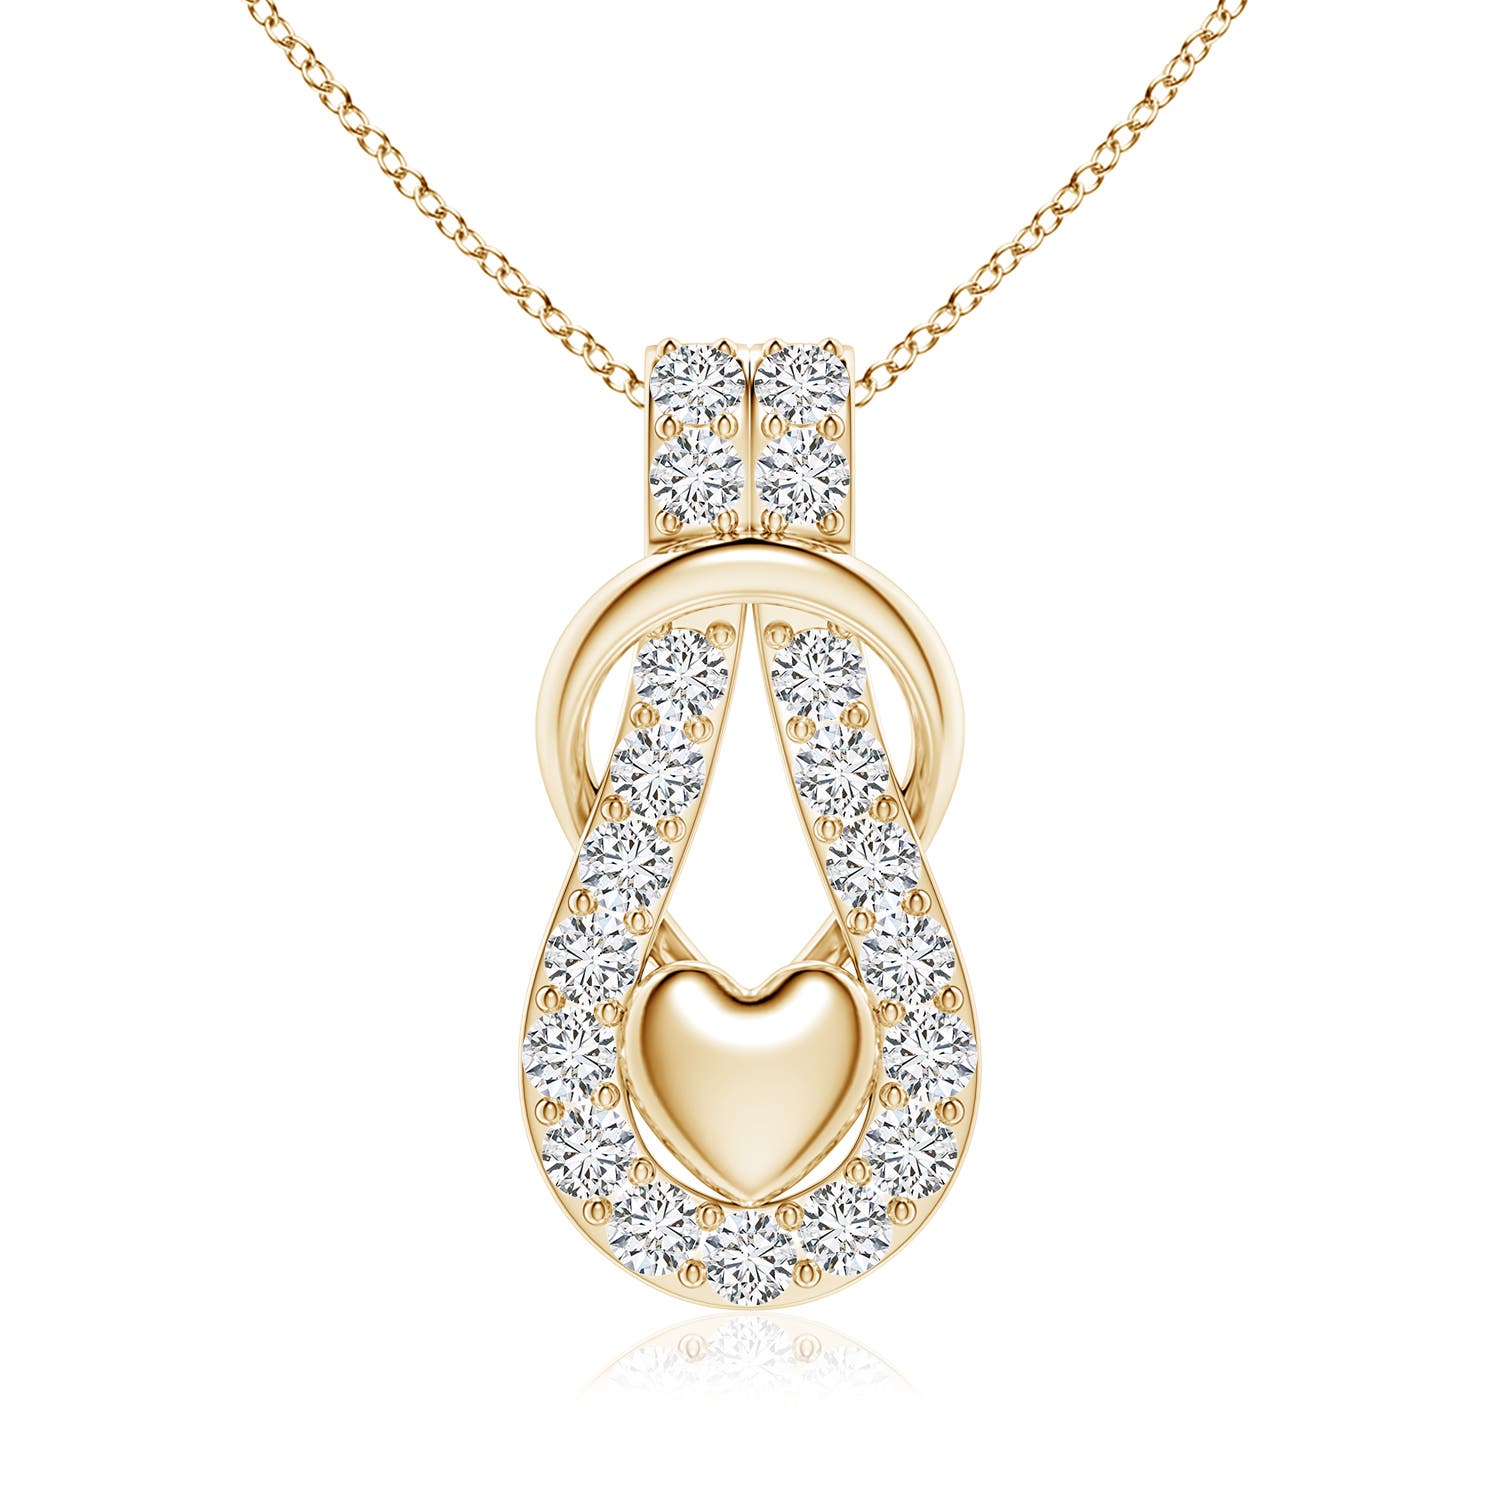 H, SI2 / 3.02 CT / 14 KT Yellow Gold